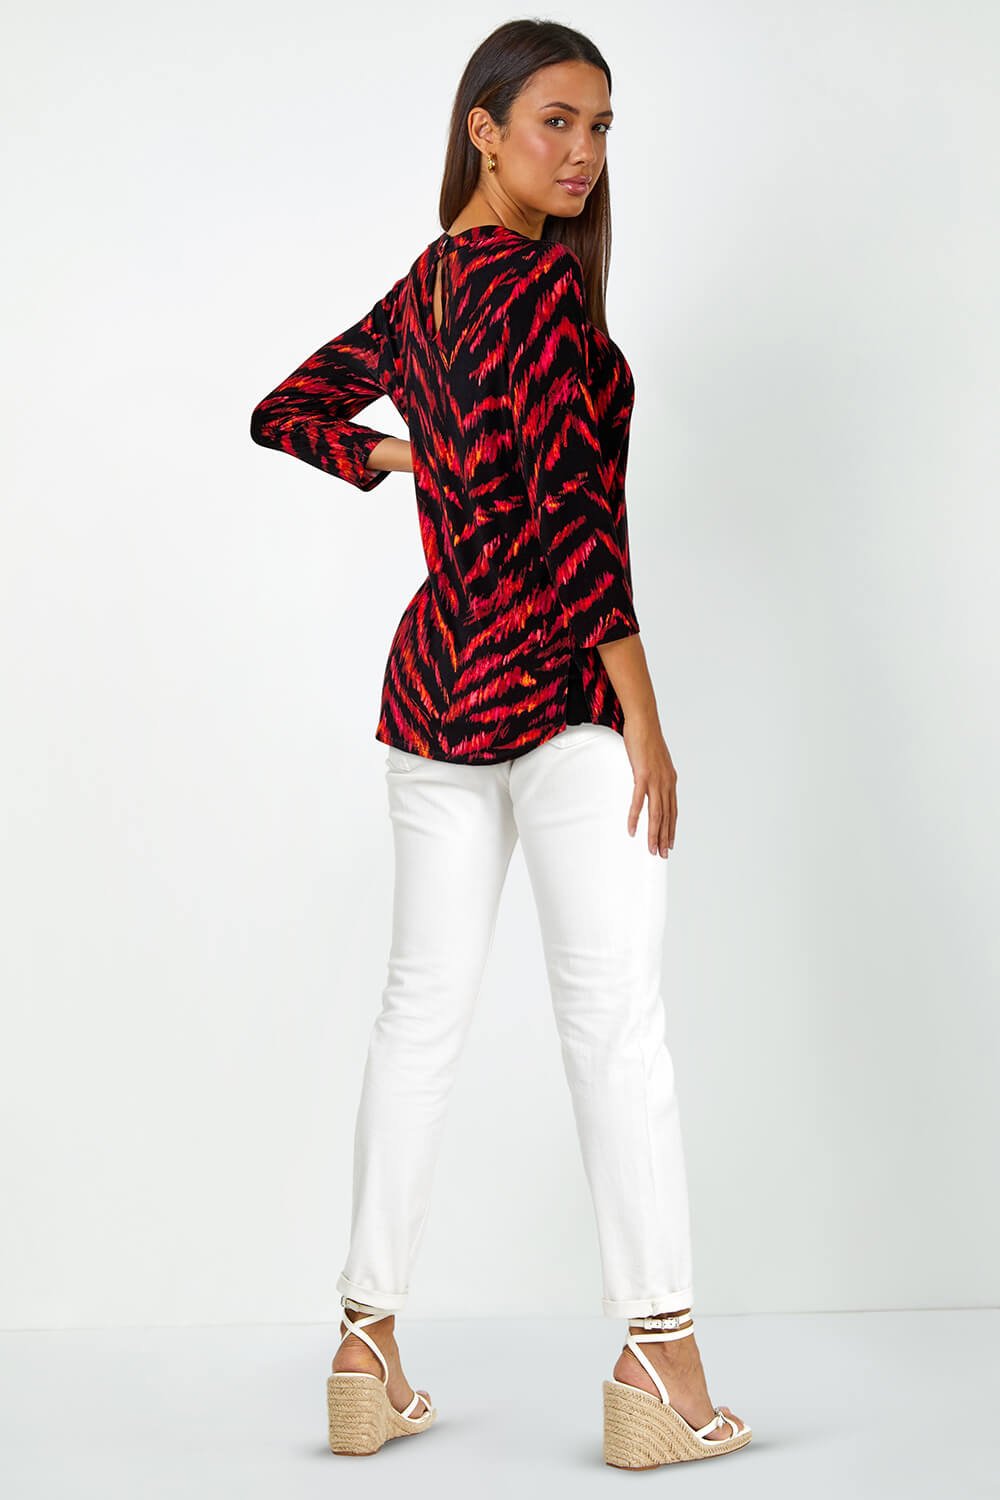 Red Animal Print Tunic Stretch Top, Image 3 of 5